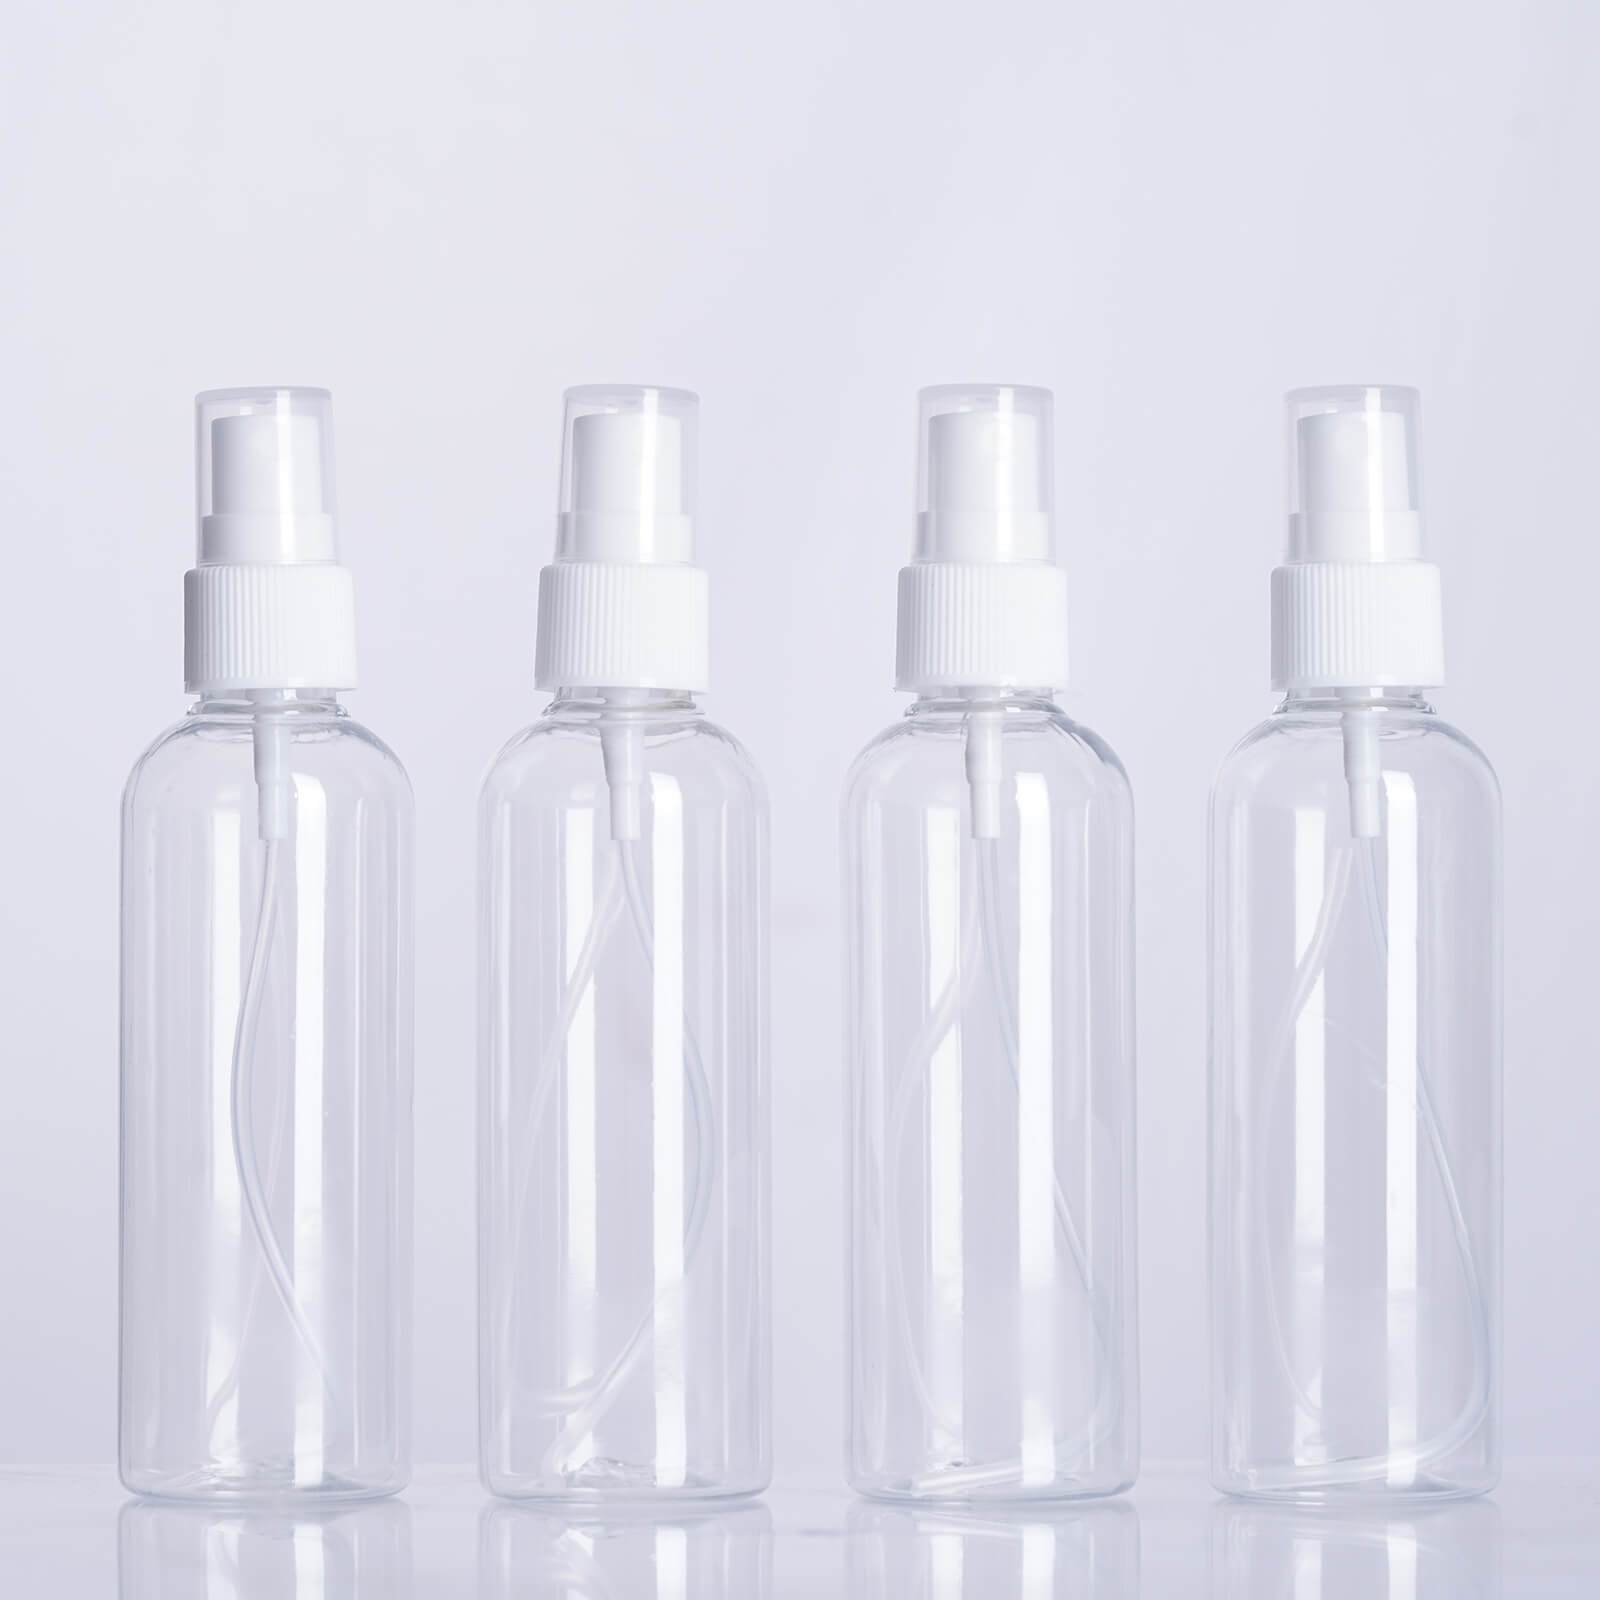 4 Clear 4 oz Empty Refillable Bottles Fine Mist Hand Sanitizer Sprays - Protective Collection